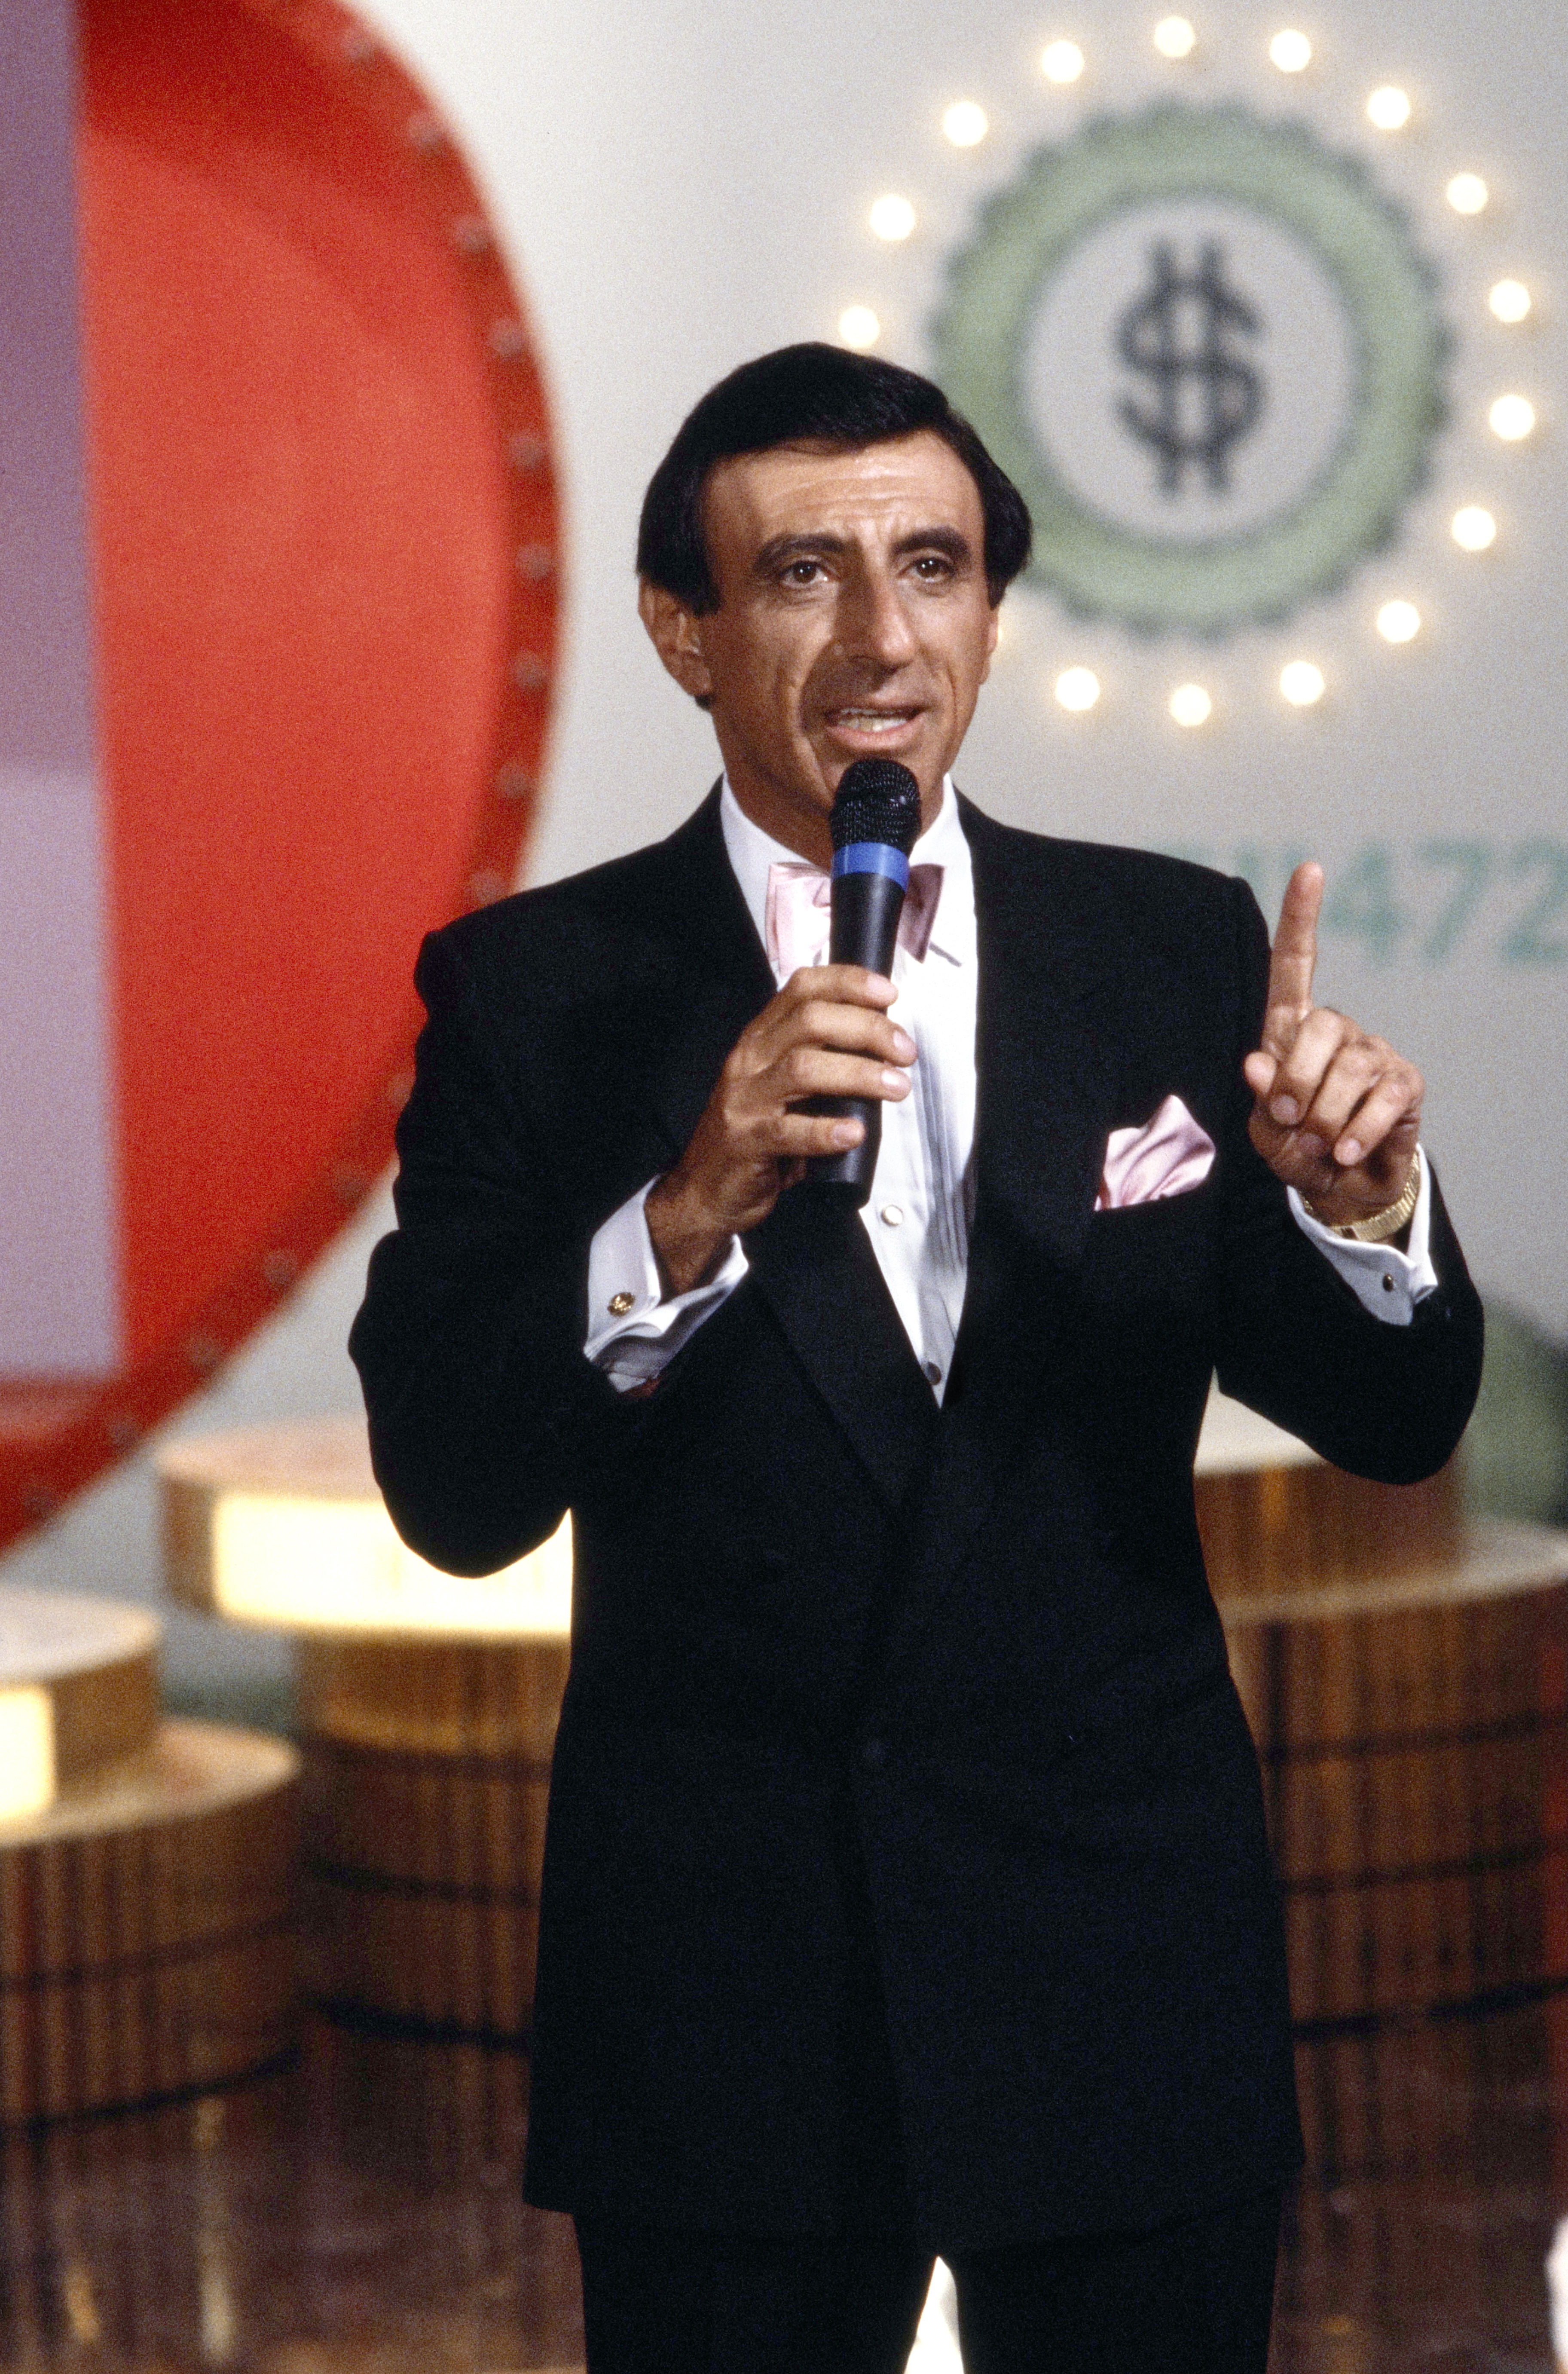 Jamie Farr as as Larry Melody in the movie "For Love or Money" on November 20, 1984 in Los Angeles, California | Source: Getty Images